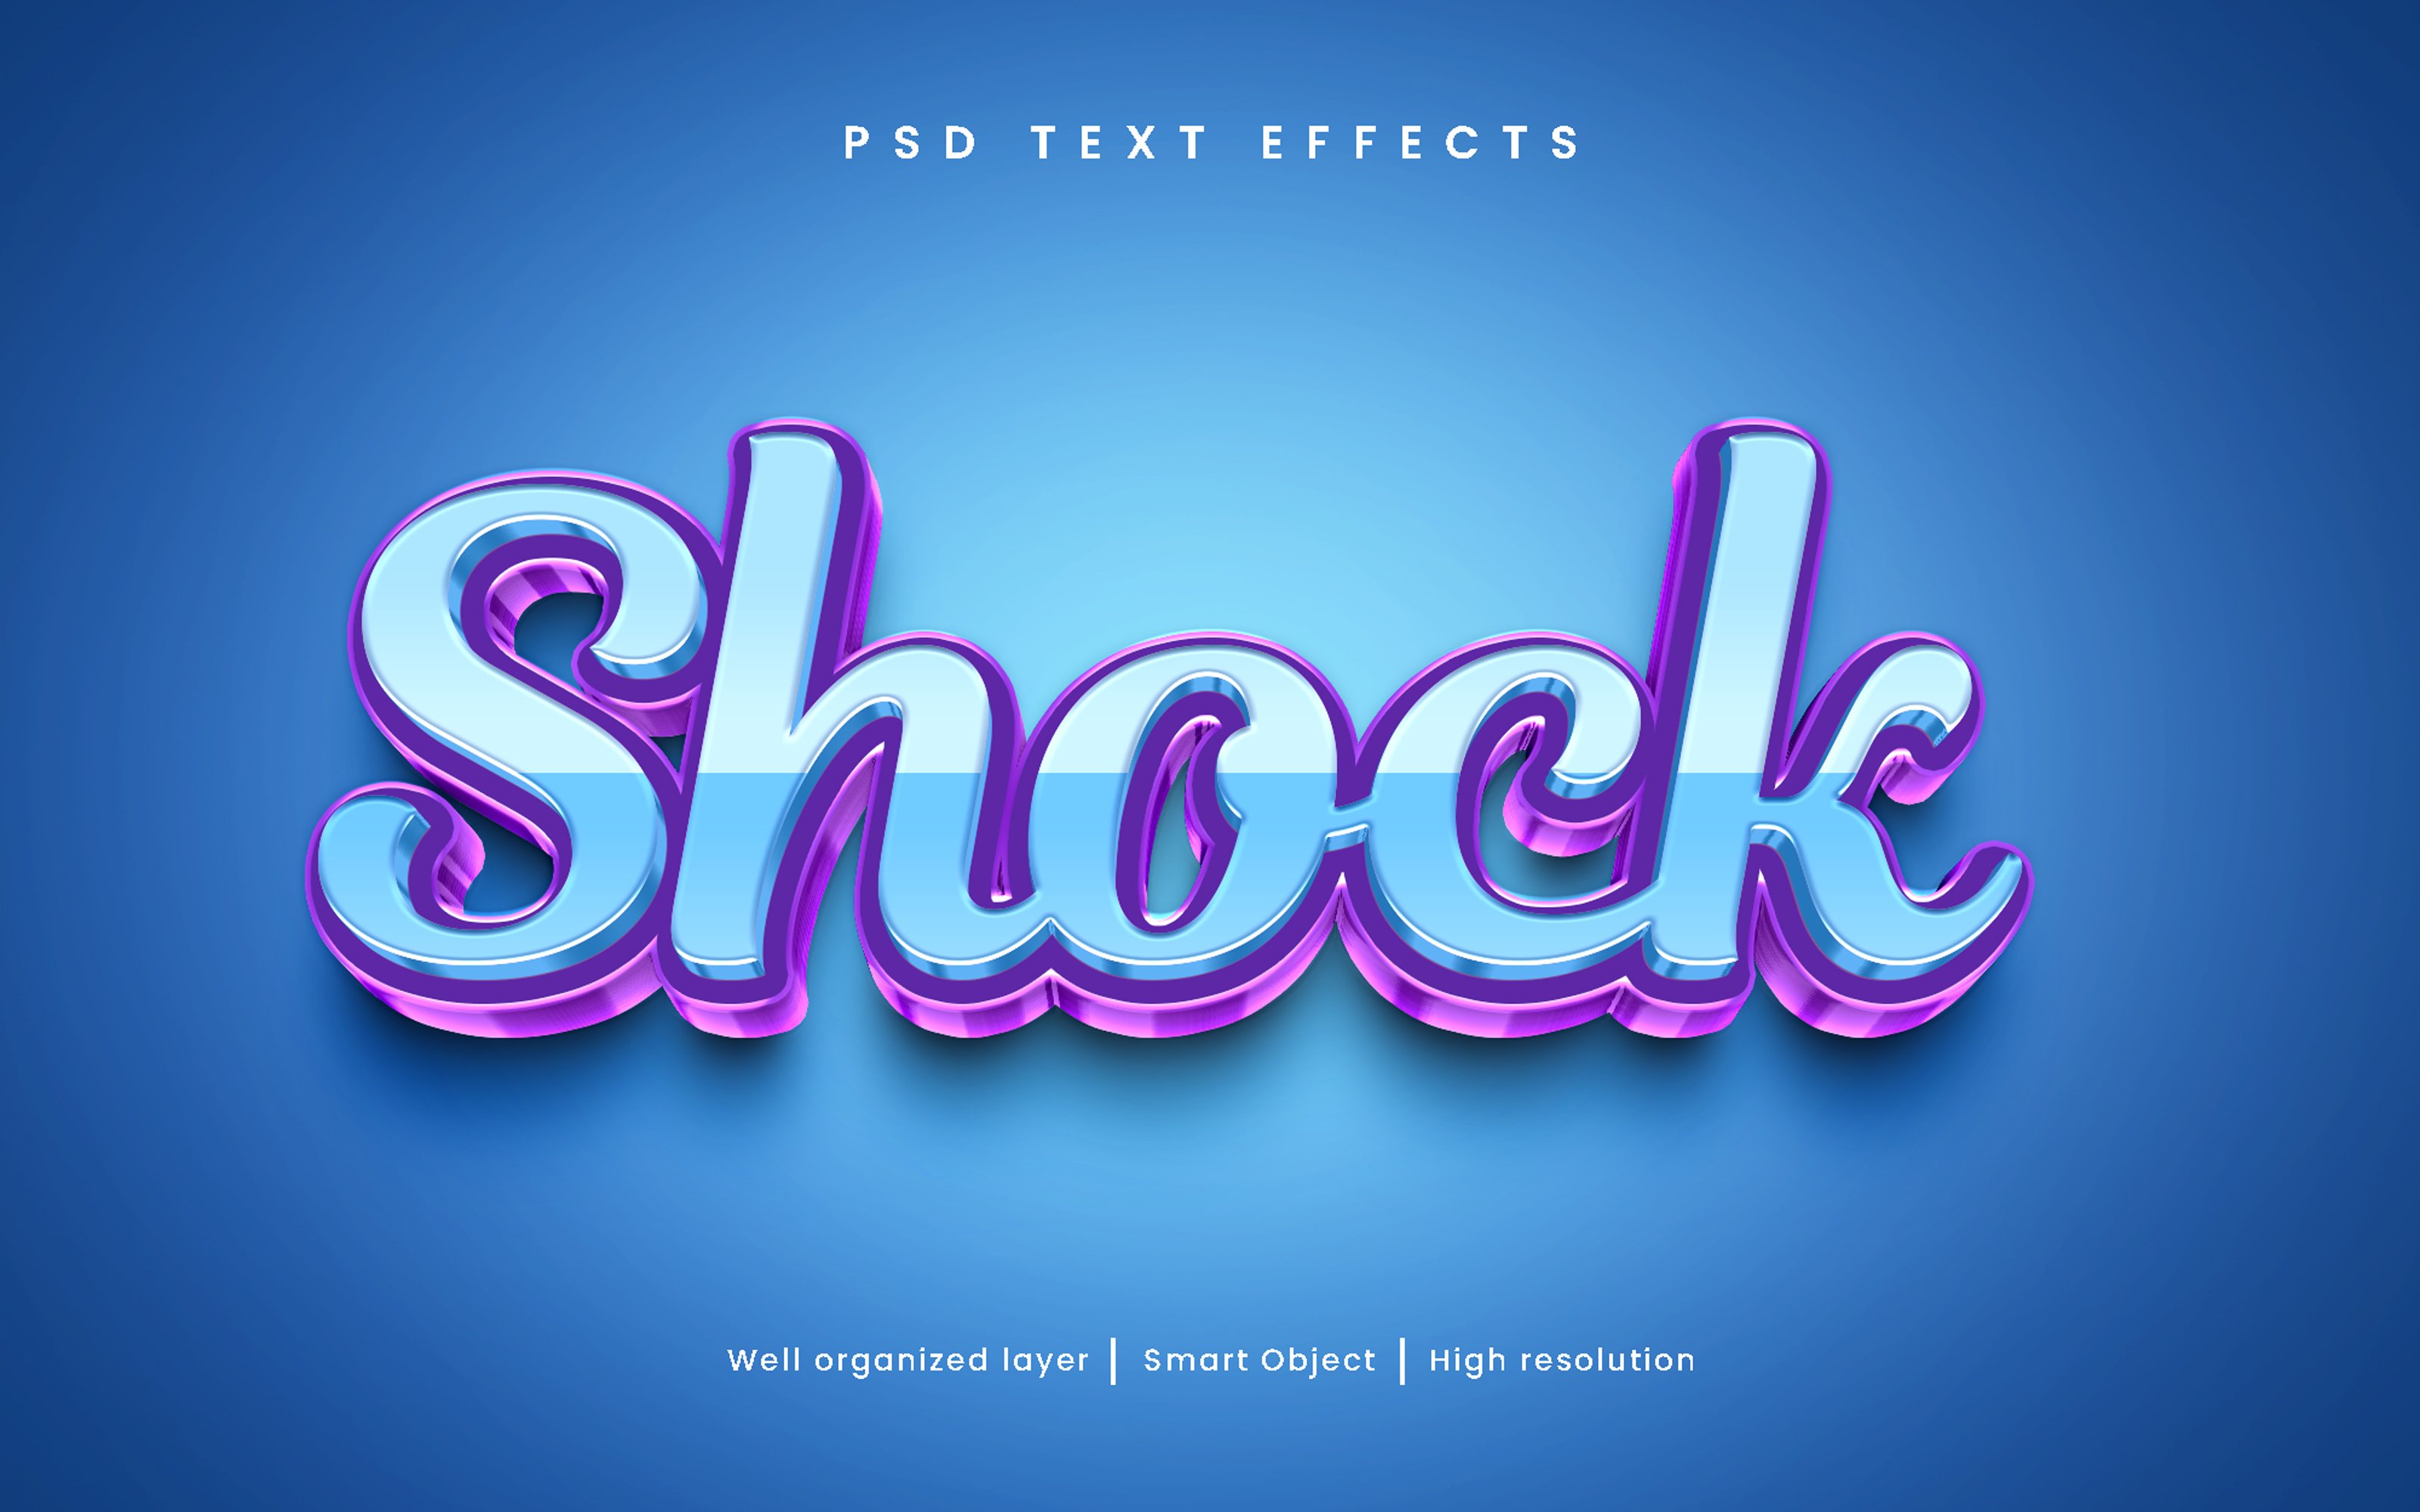 3D style shock editable text effectcover image.